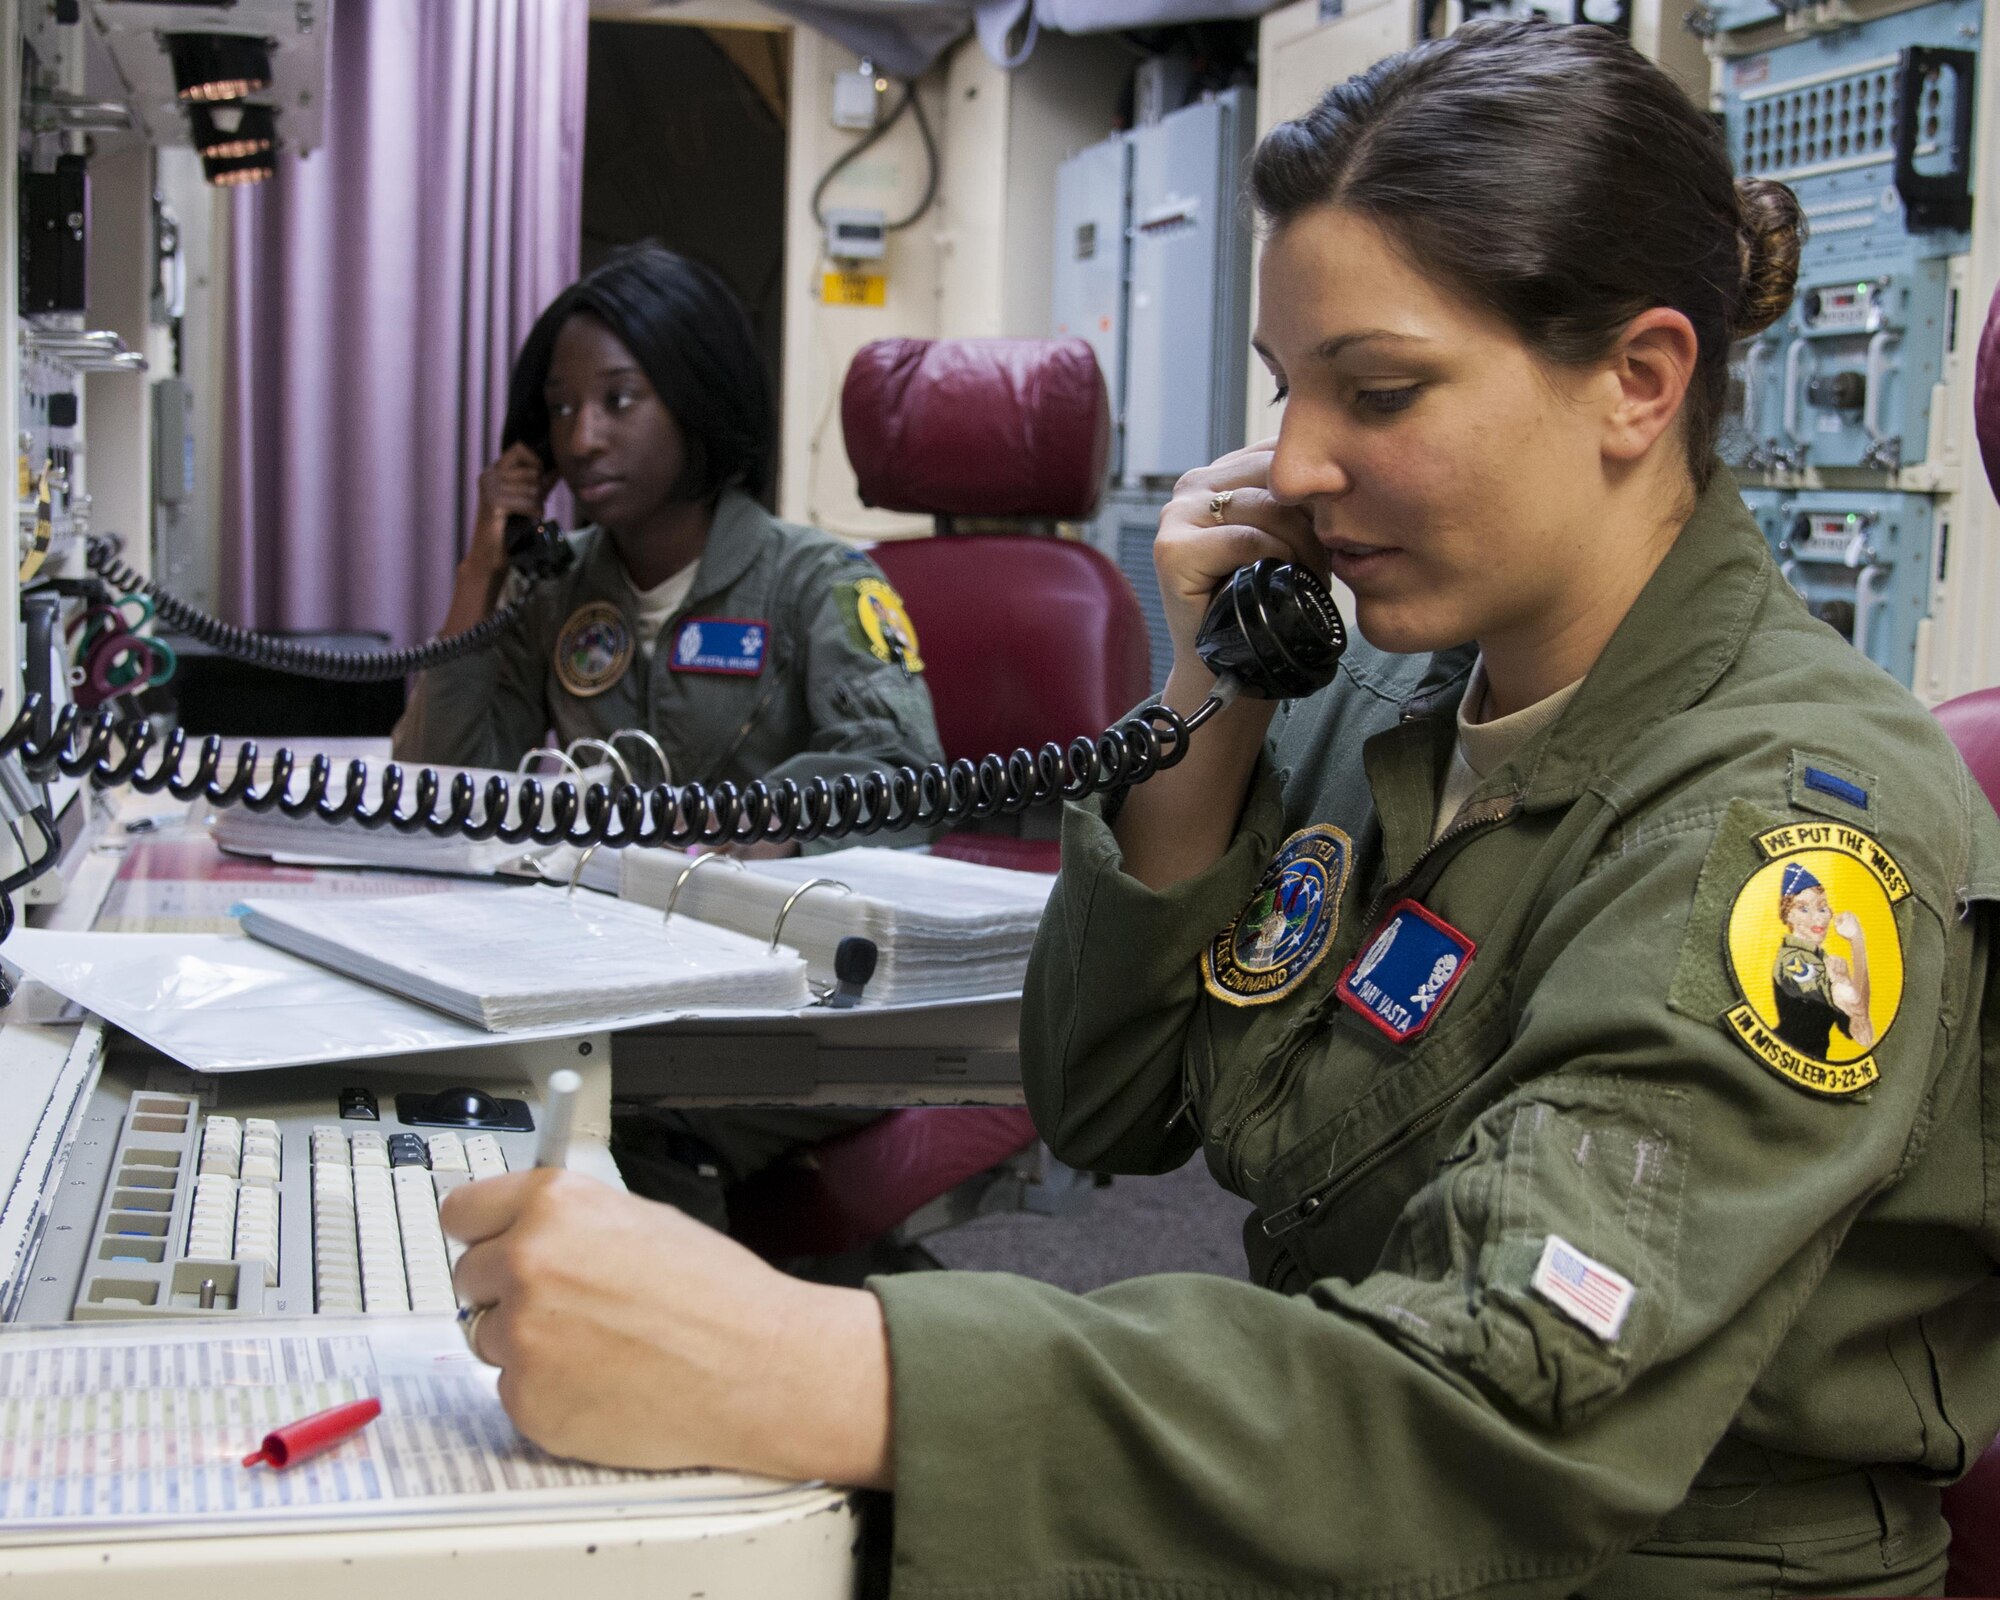 1st Lt. Mary Vasta, 319th Missile Squadron combat crew commander, and 1st Lt. Krystal Wilder, 319th MS combat crew deputy, speak on phones in a launch control center, March 22, 2016, in the F.E. Warren Air Force Base, Wyo., missile complex. Female officers participating in the all-female alert wore specialized badges to commemorate the event. (U.S. Air Force photo by Airmen 1st Class Malcolm Mayfield)